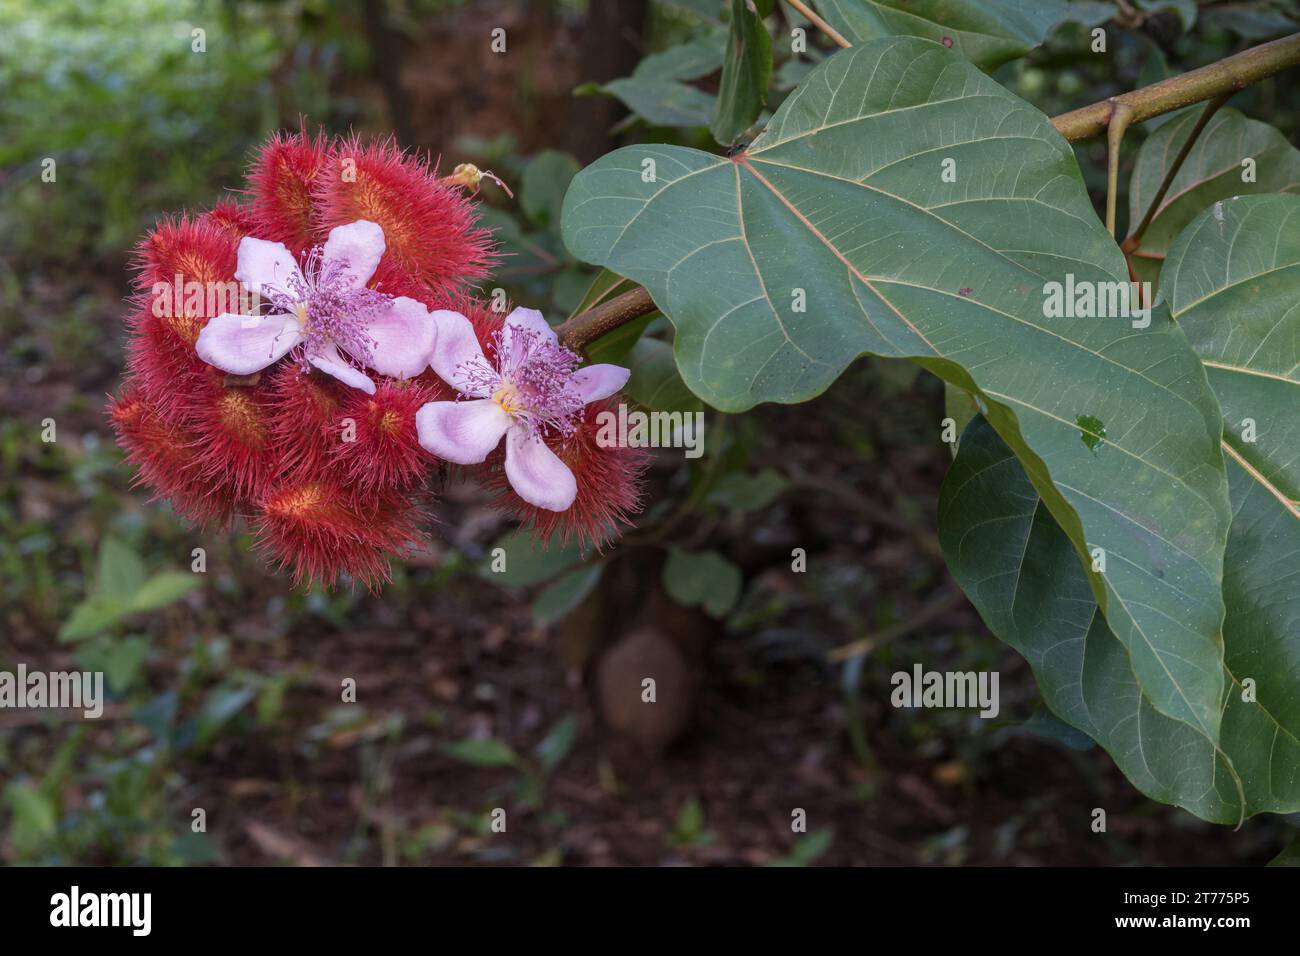 Closeup view of pink flowers, young red fruits and foliage of bixa orellana aka achiote or lipstick tree outdoors on natural background Stock Photo